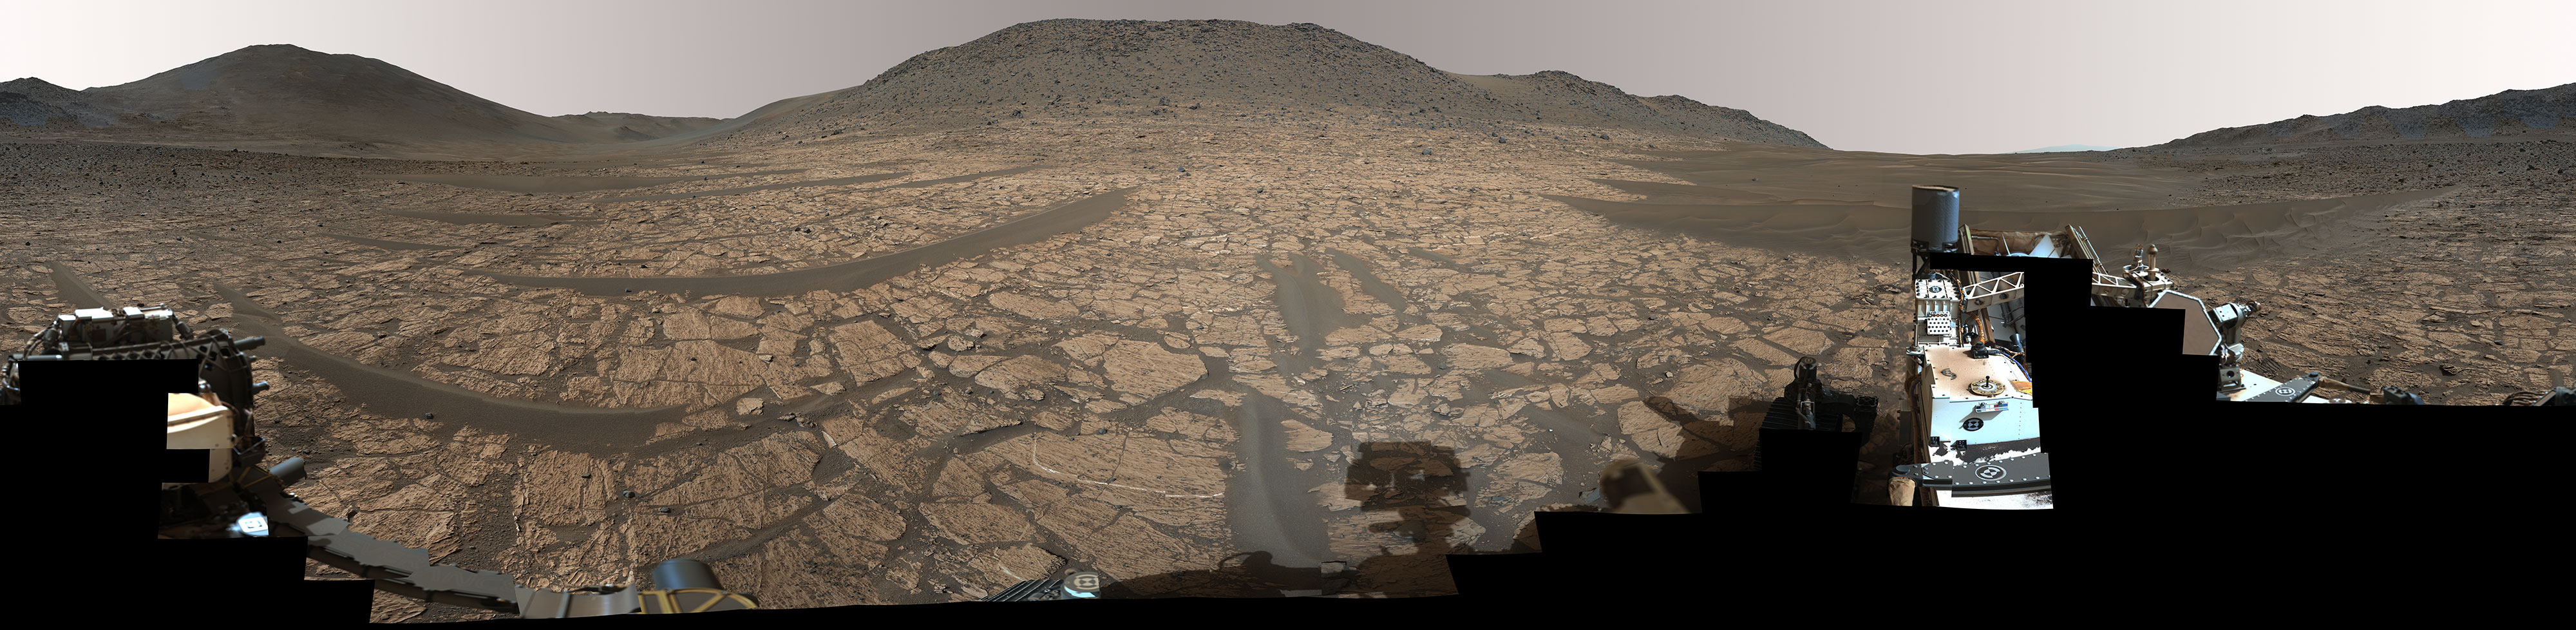 NASA’s Perseverance rover used its Mastcam-Z instrument to capture this 360-degree panorama of a region on Mars called “Bright Angel,” where an ancient river flowed billions of years ago. “Cheyava Falls” was discovered in the area slightly right of center, about 361 feet (110 meters) from the rover.